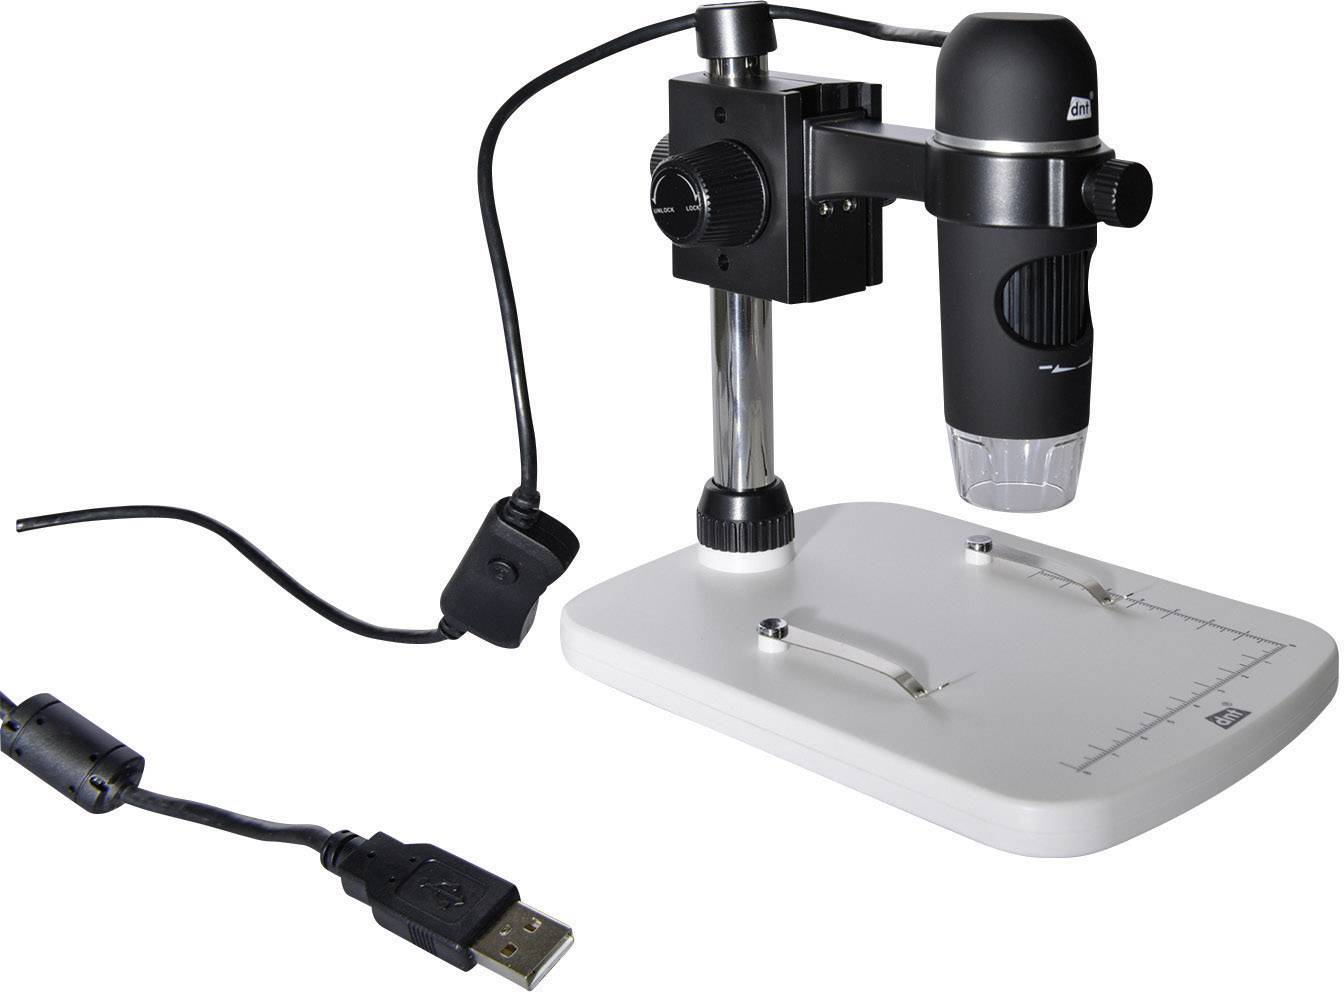 free usb microscope software review